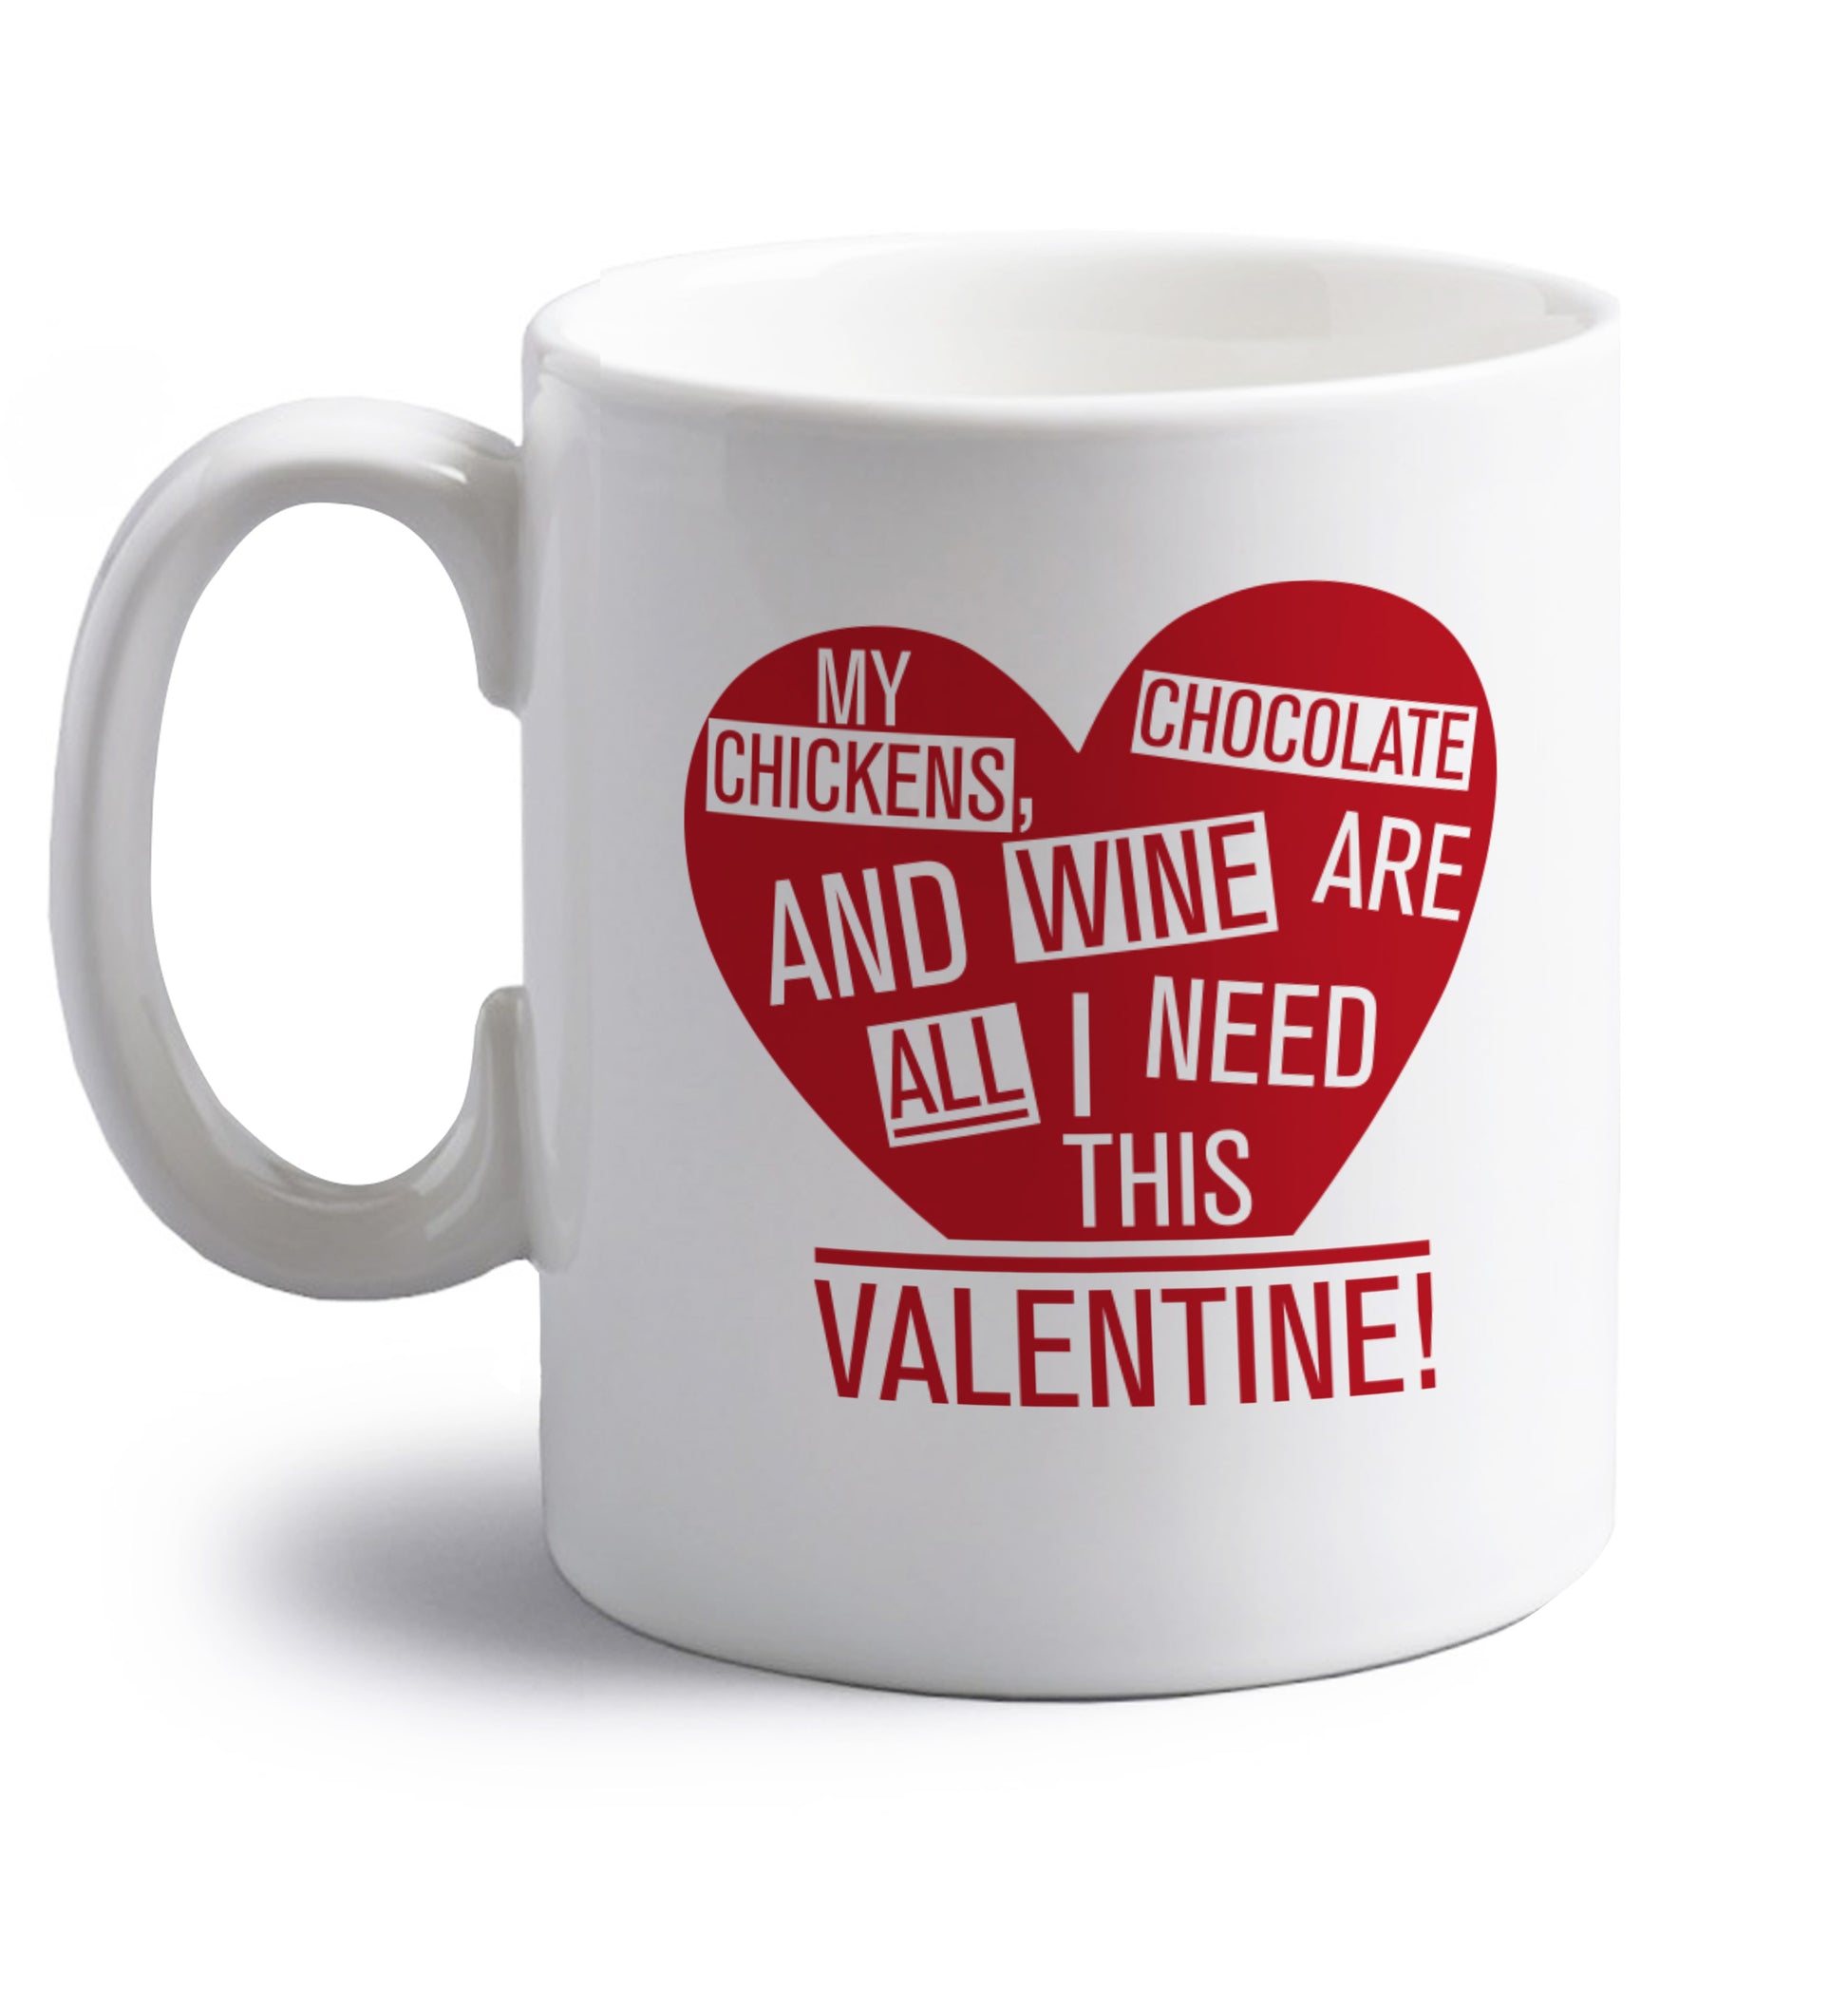 My chickens, chocolate and wine are all I need this valentine! right handed white ceramic mug 